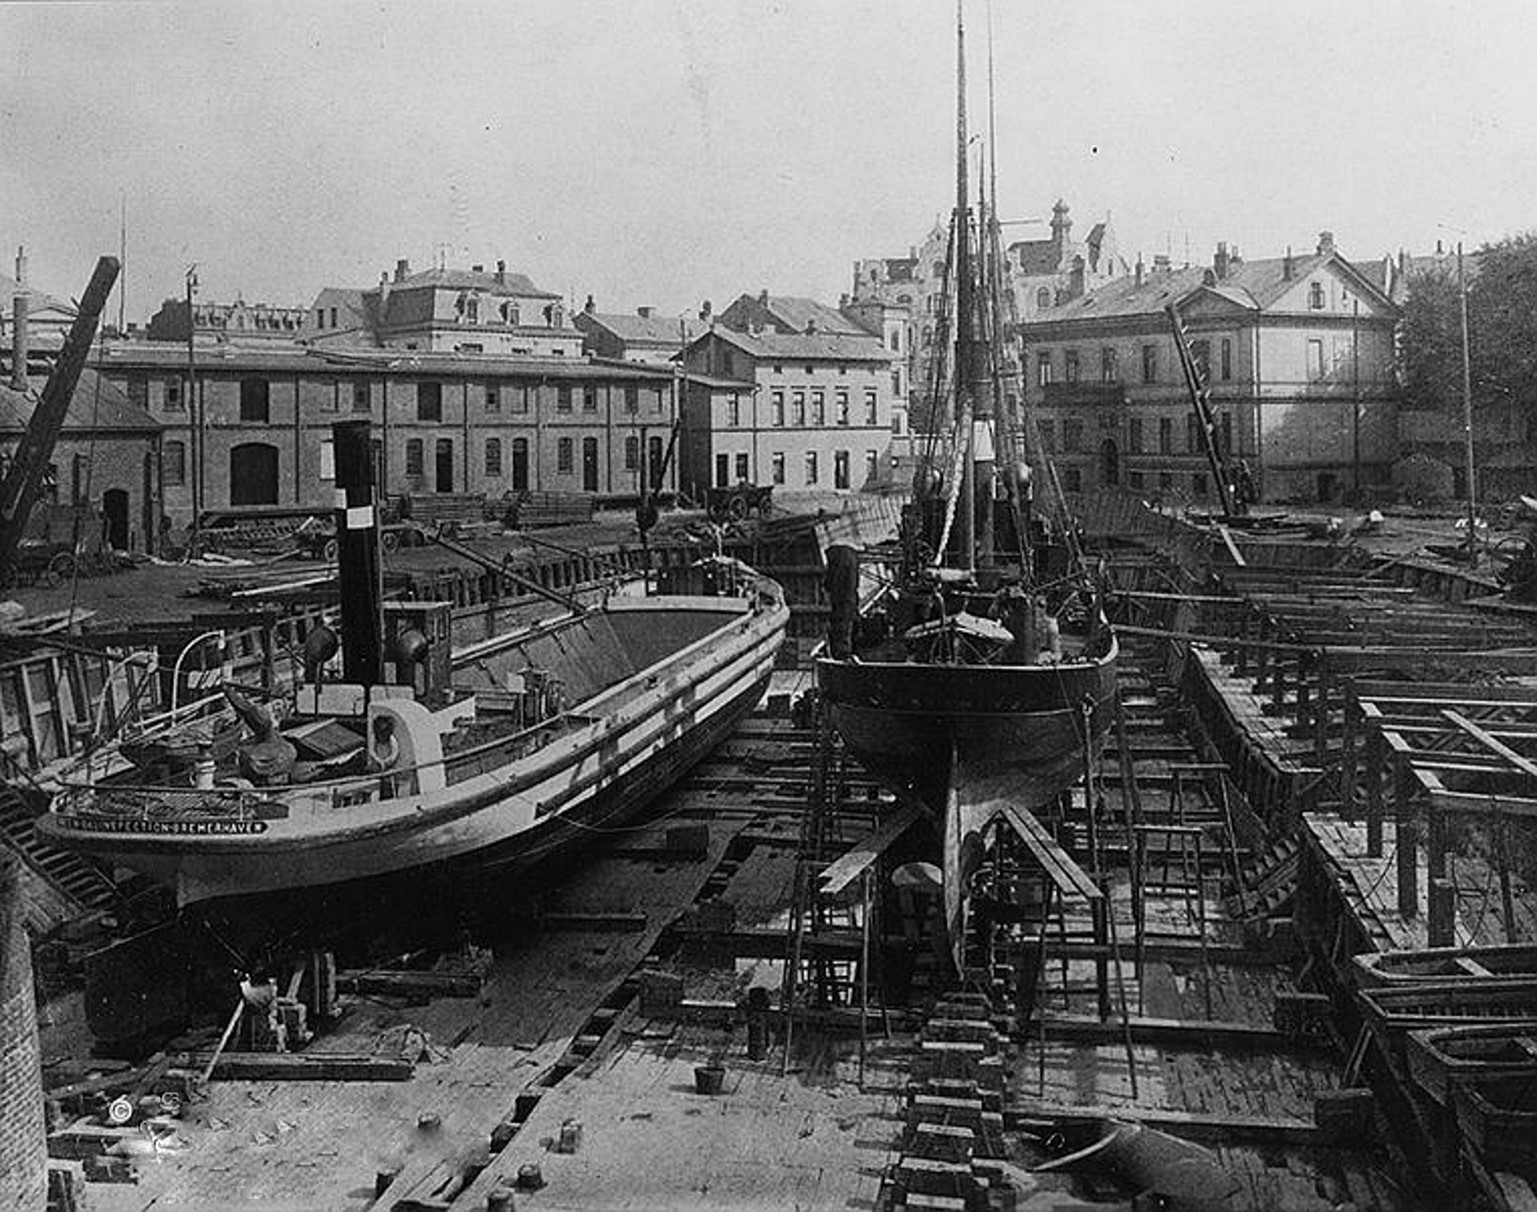 The King George double dry dock of Tecklenborg shipyard, Bremerhaven, Germany, date unknown